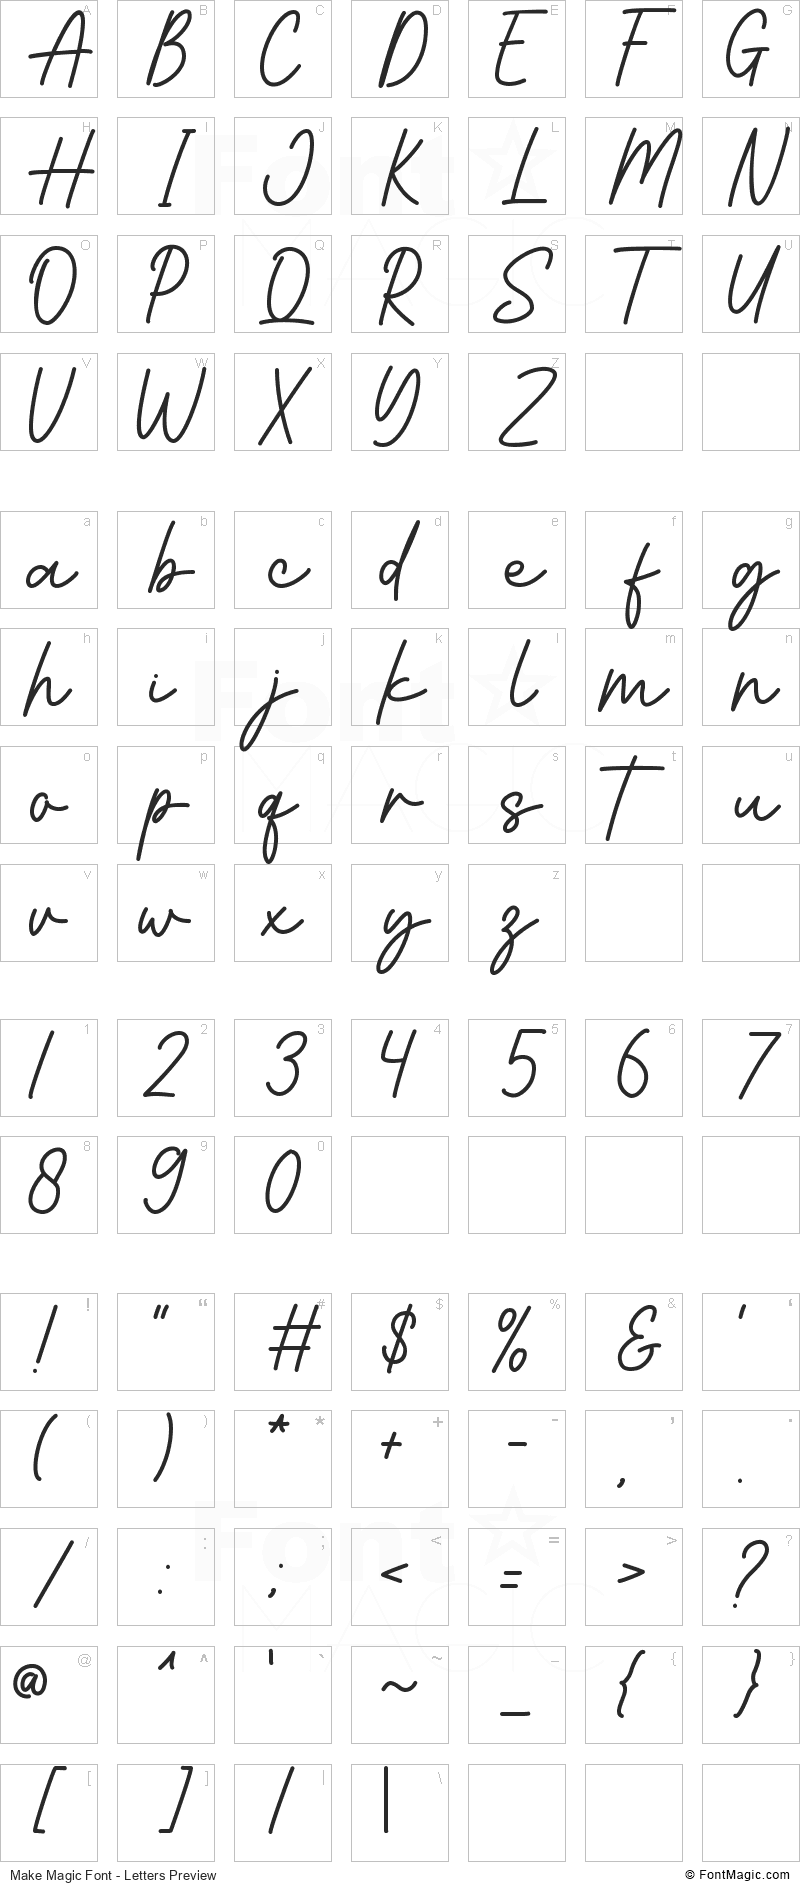 Make Magic Font - All Latters Preview Chart